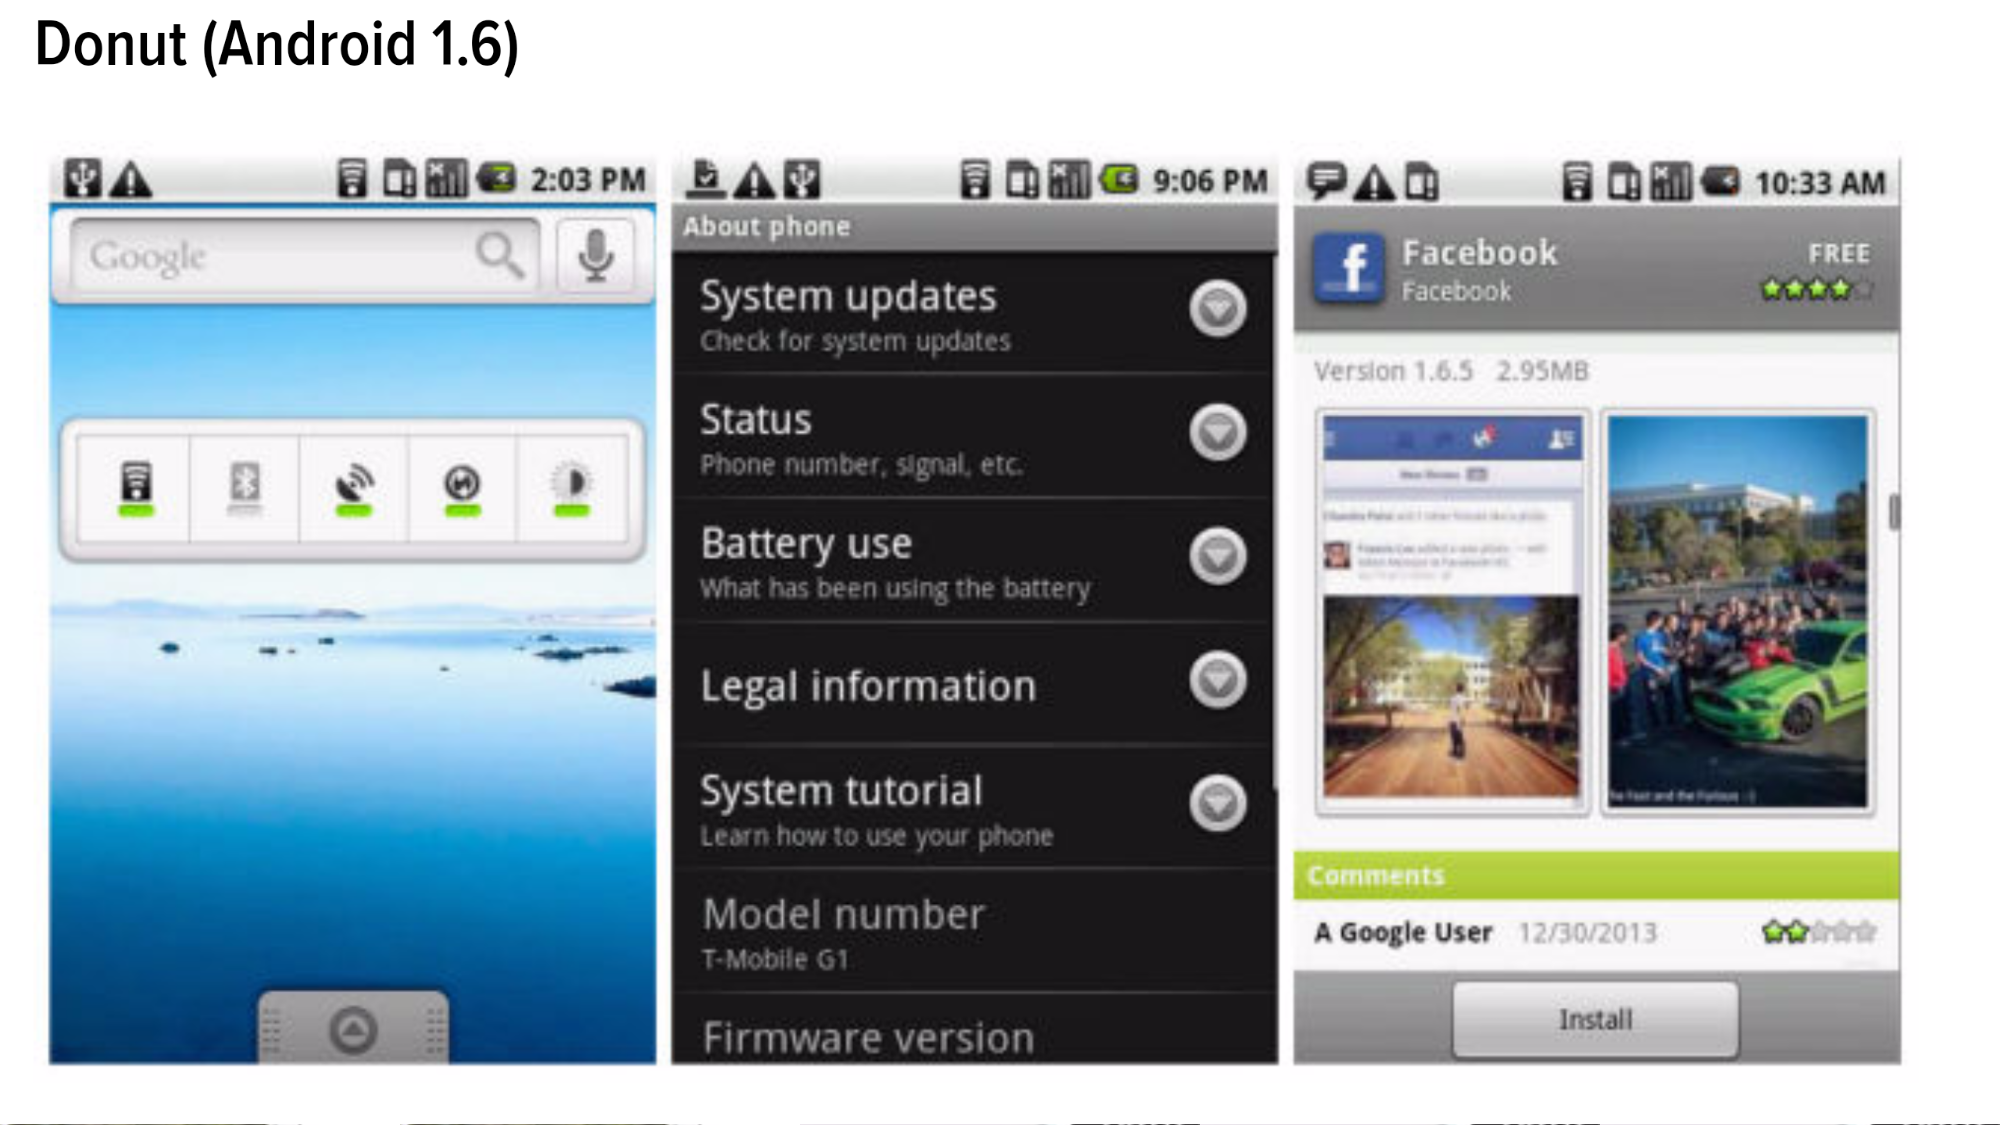 Android 1.6